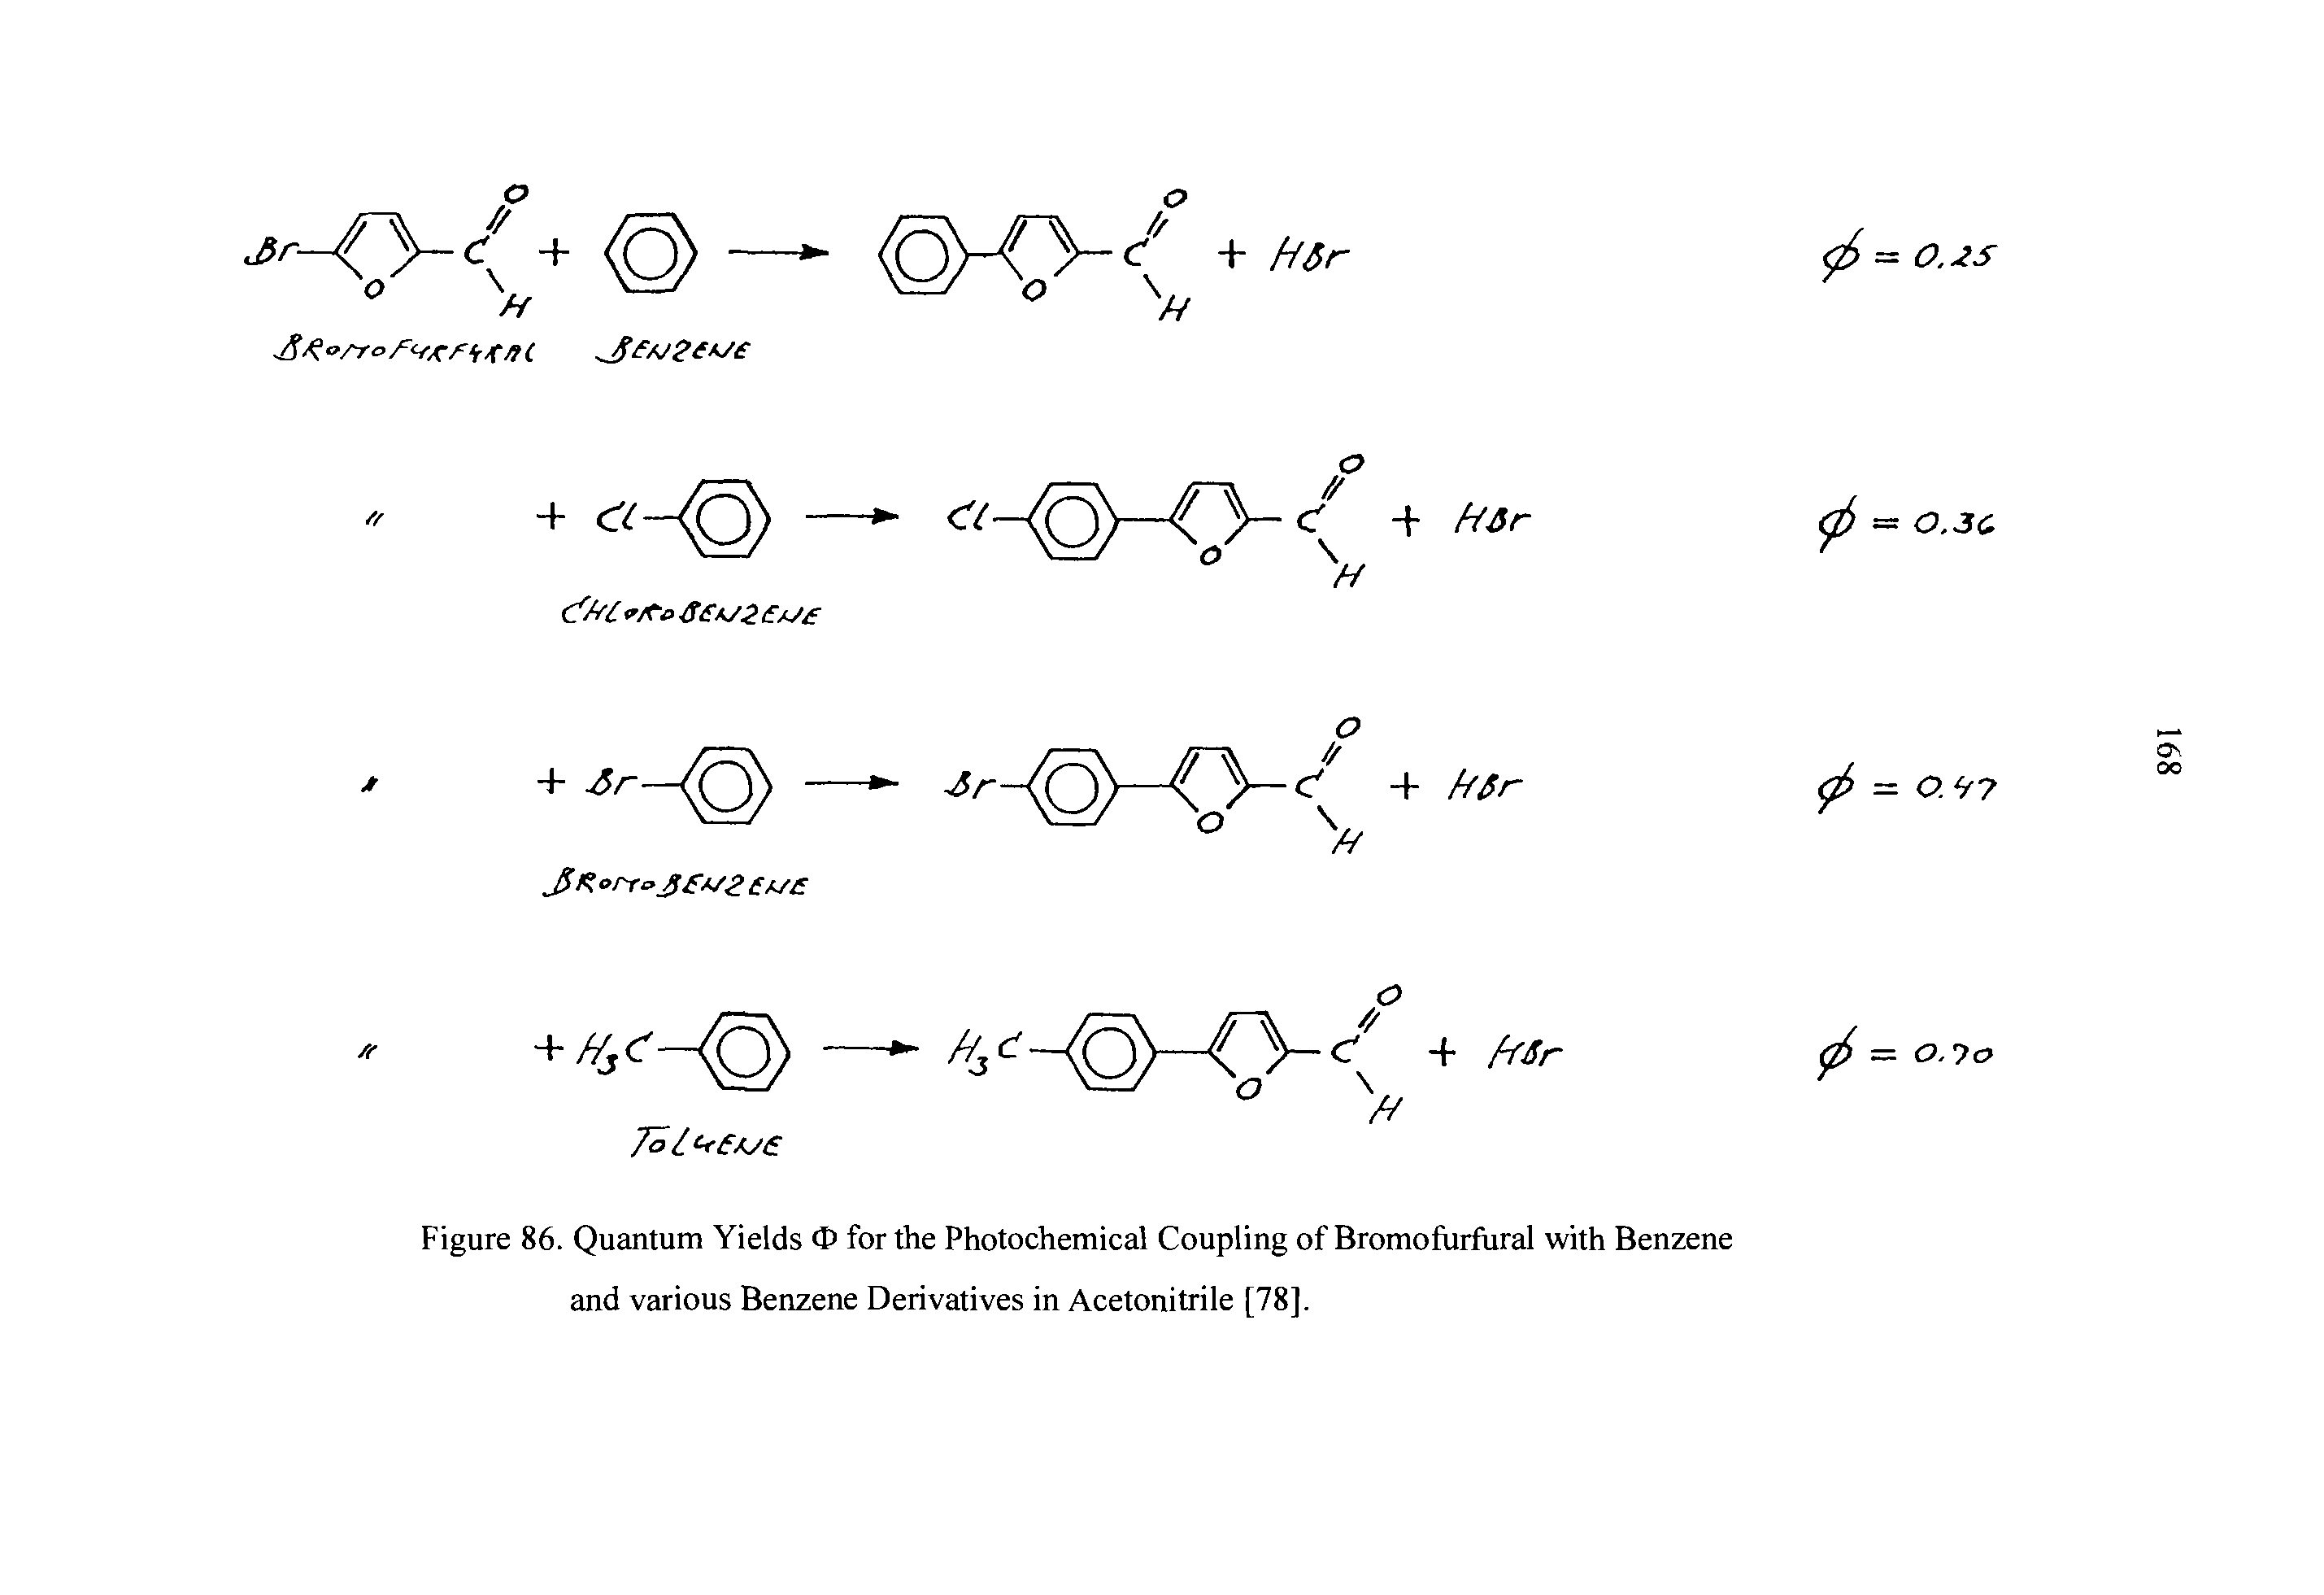 Figure 86. Quantum Yields O for the Photochemical Coupling of Bromofurfural with Benzene and various Benzene Derivatives in Acetonitrile [78].